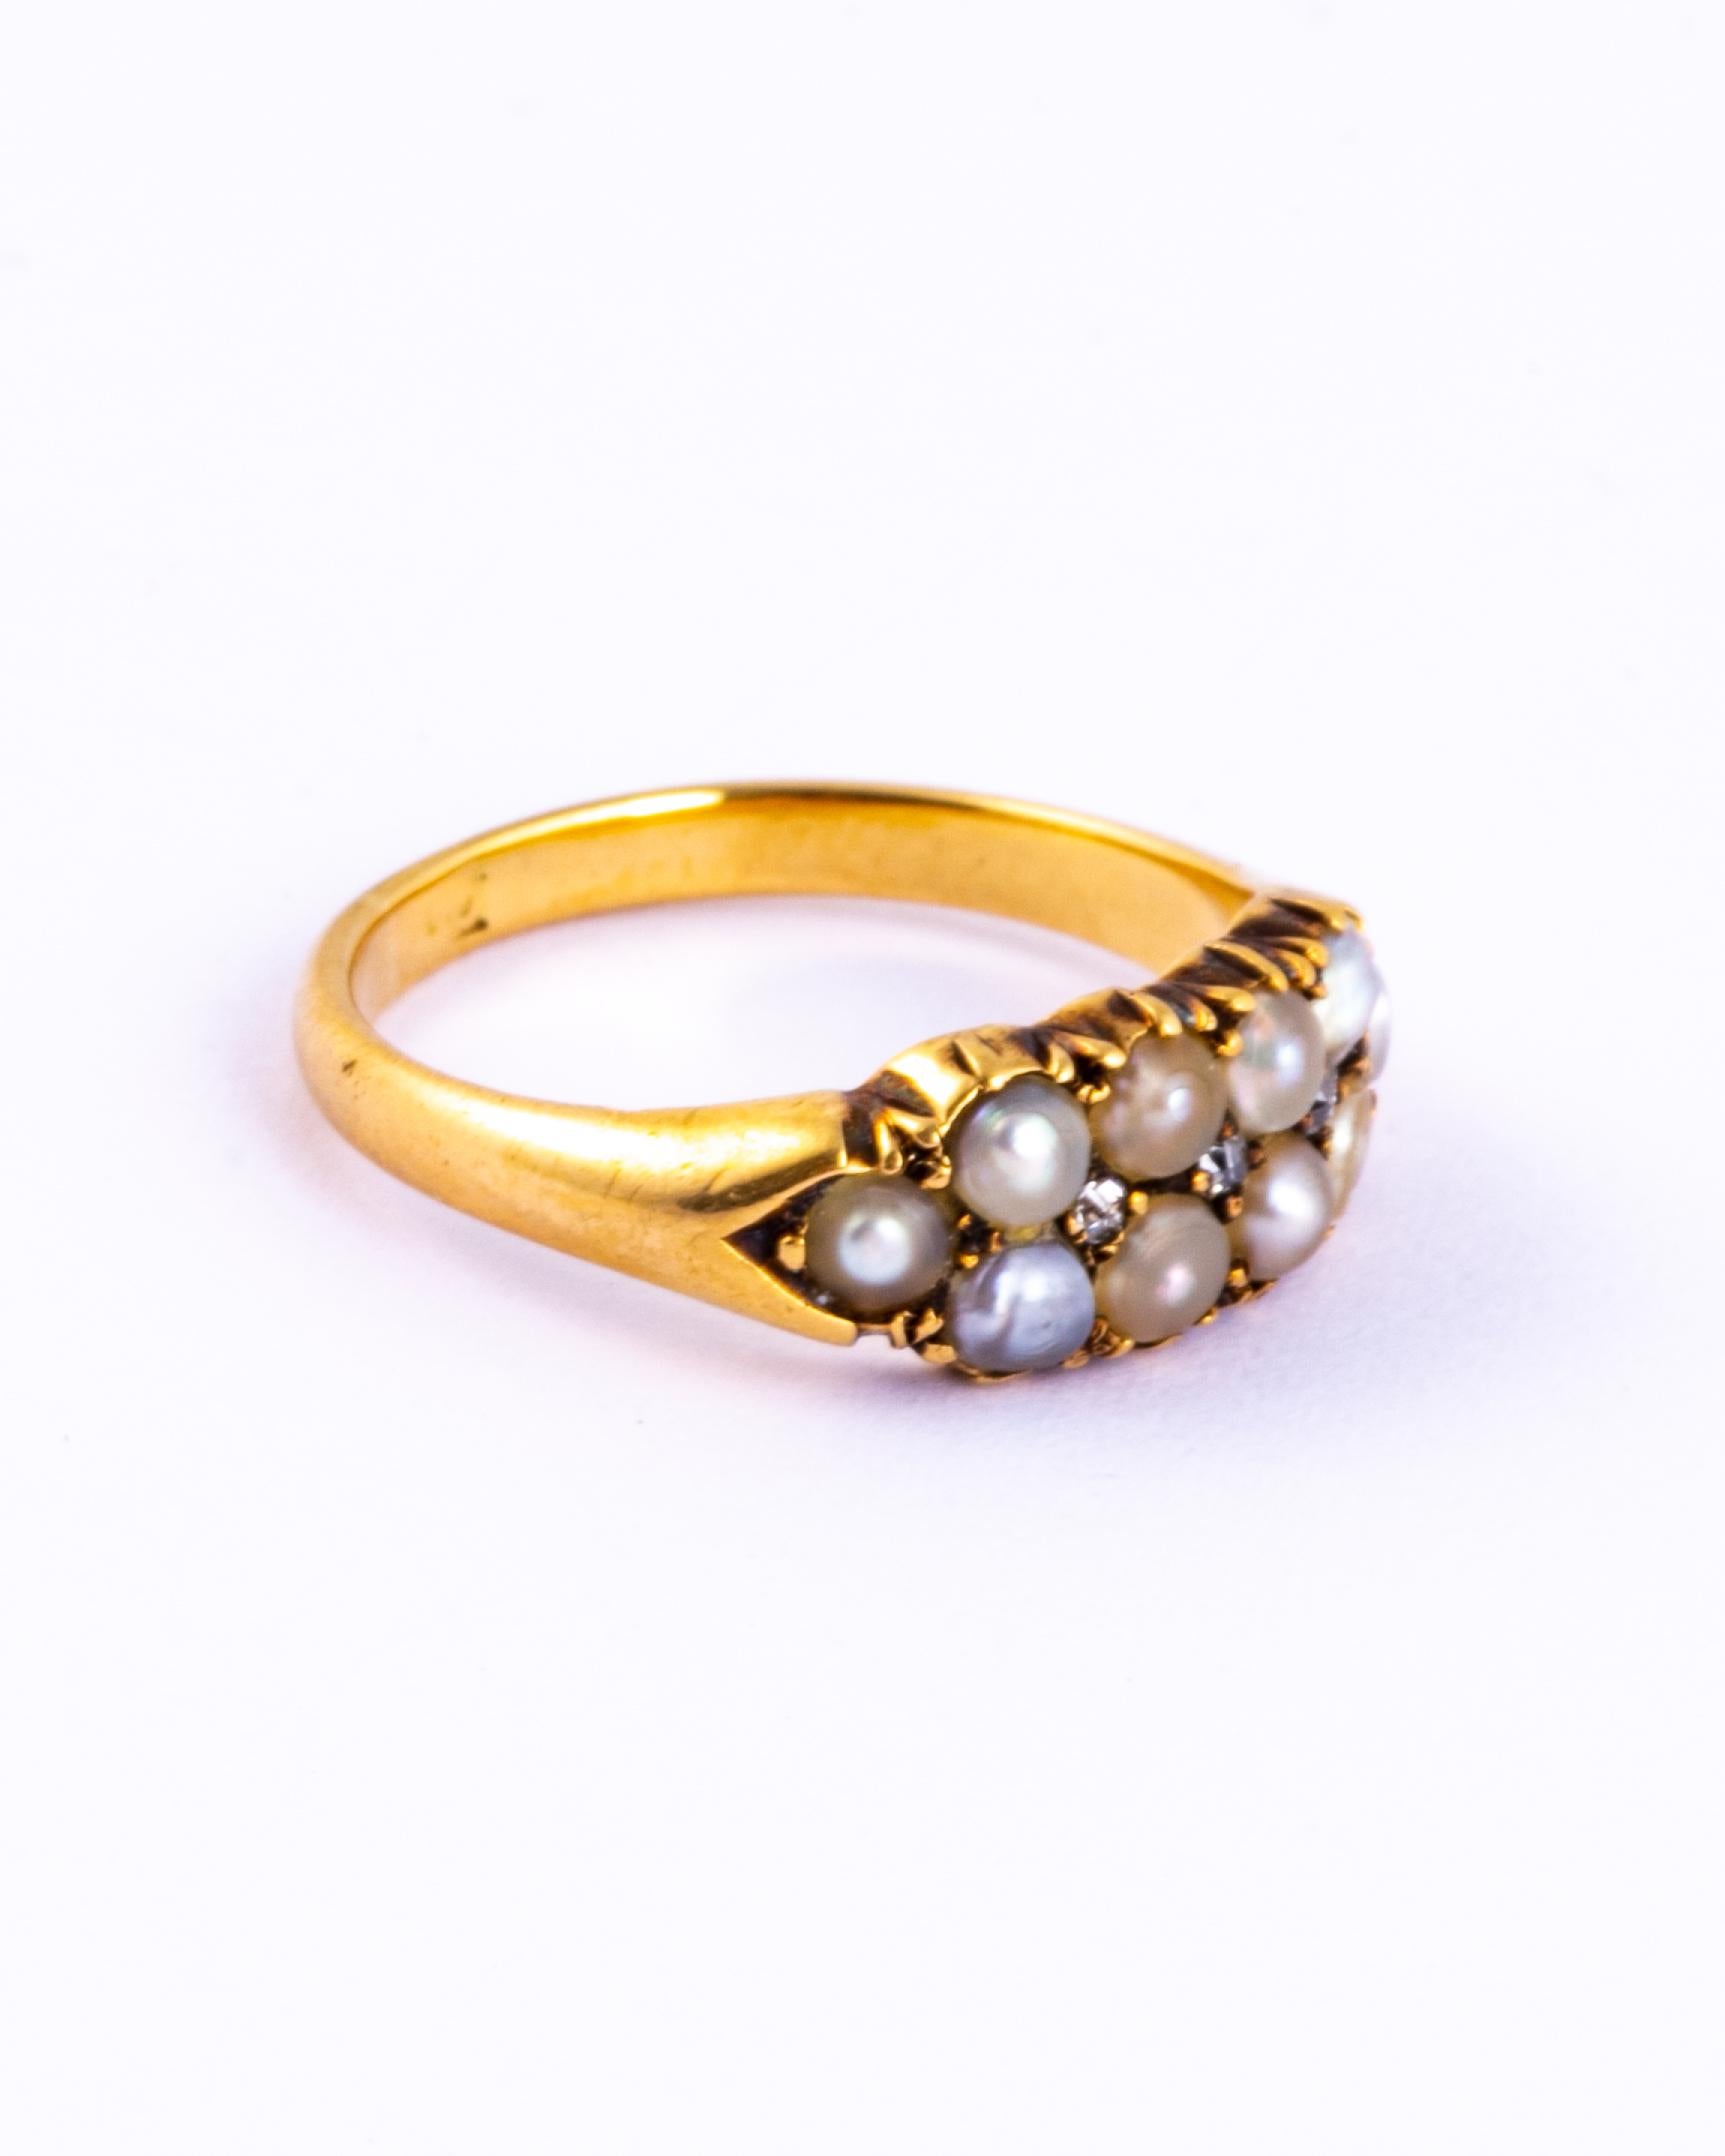 This sweet ring holds two rows of pearls and in-between them are a row of three rose cut diamonds which add the perfect amount of sparkle to this ring. 

Size: K 1/2 or 5 1/2 
Width: 6.5mm

Weight: 4 grams